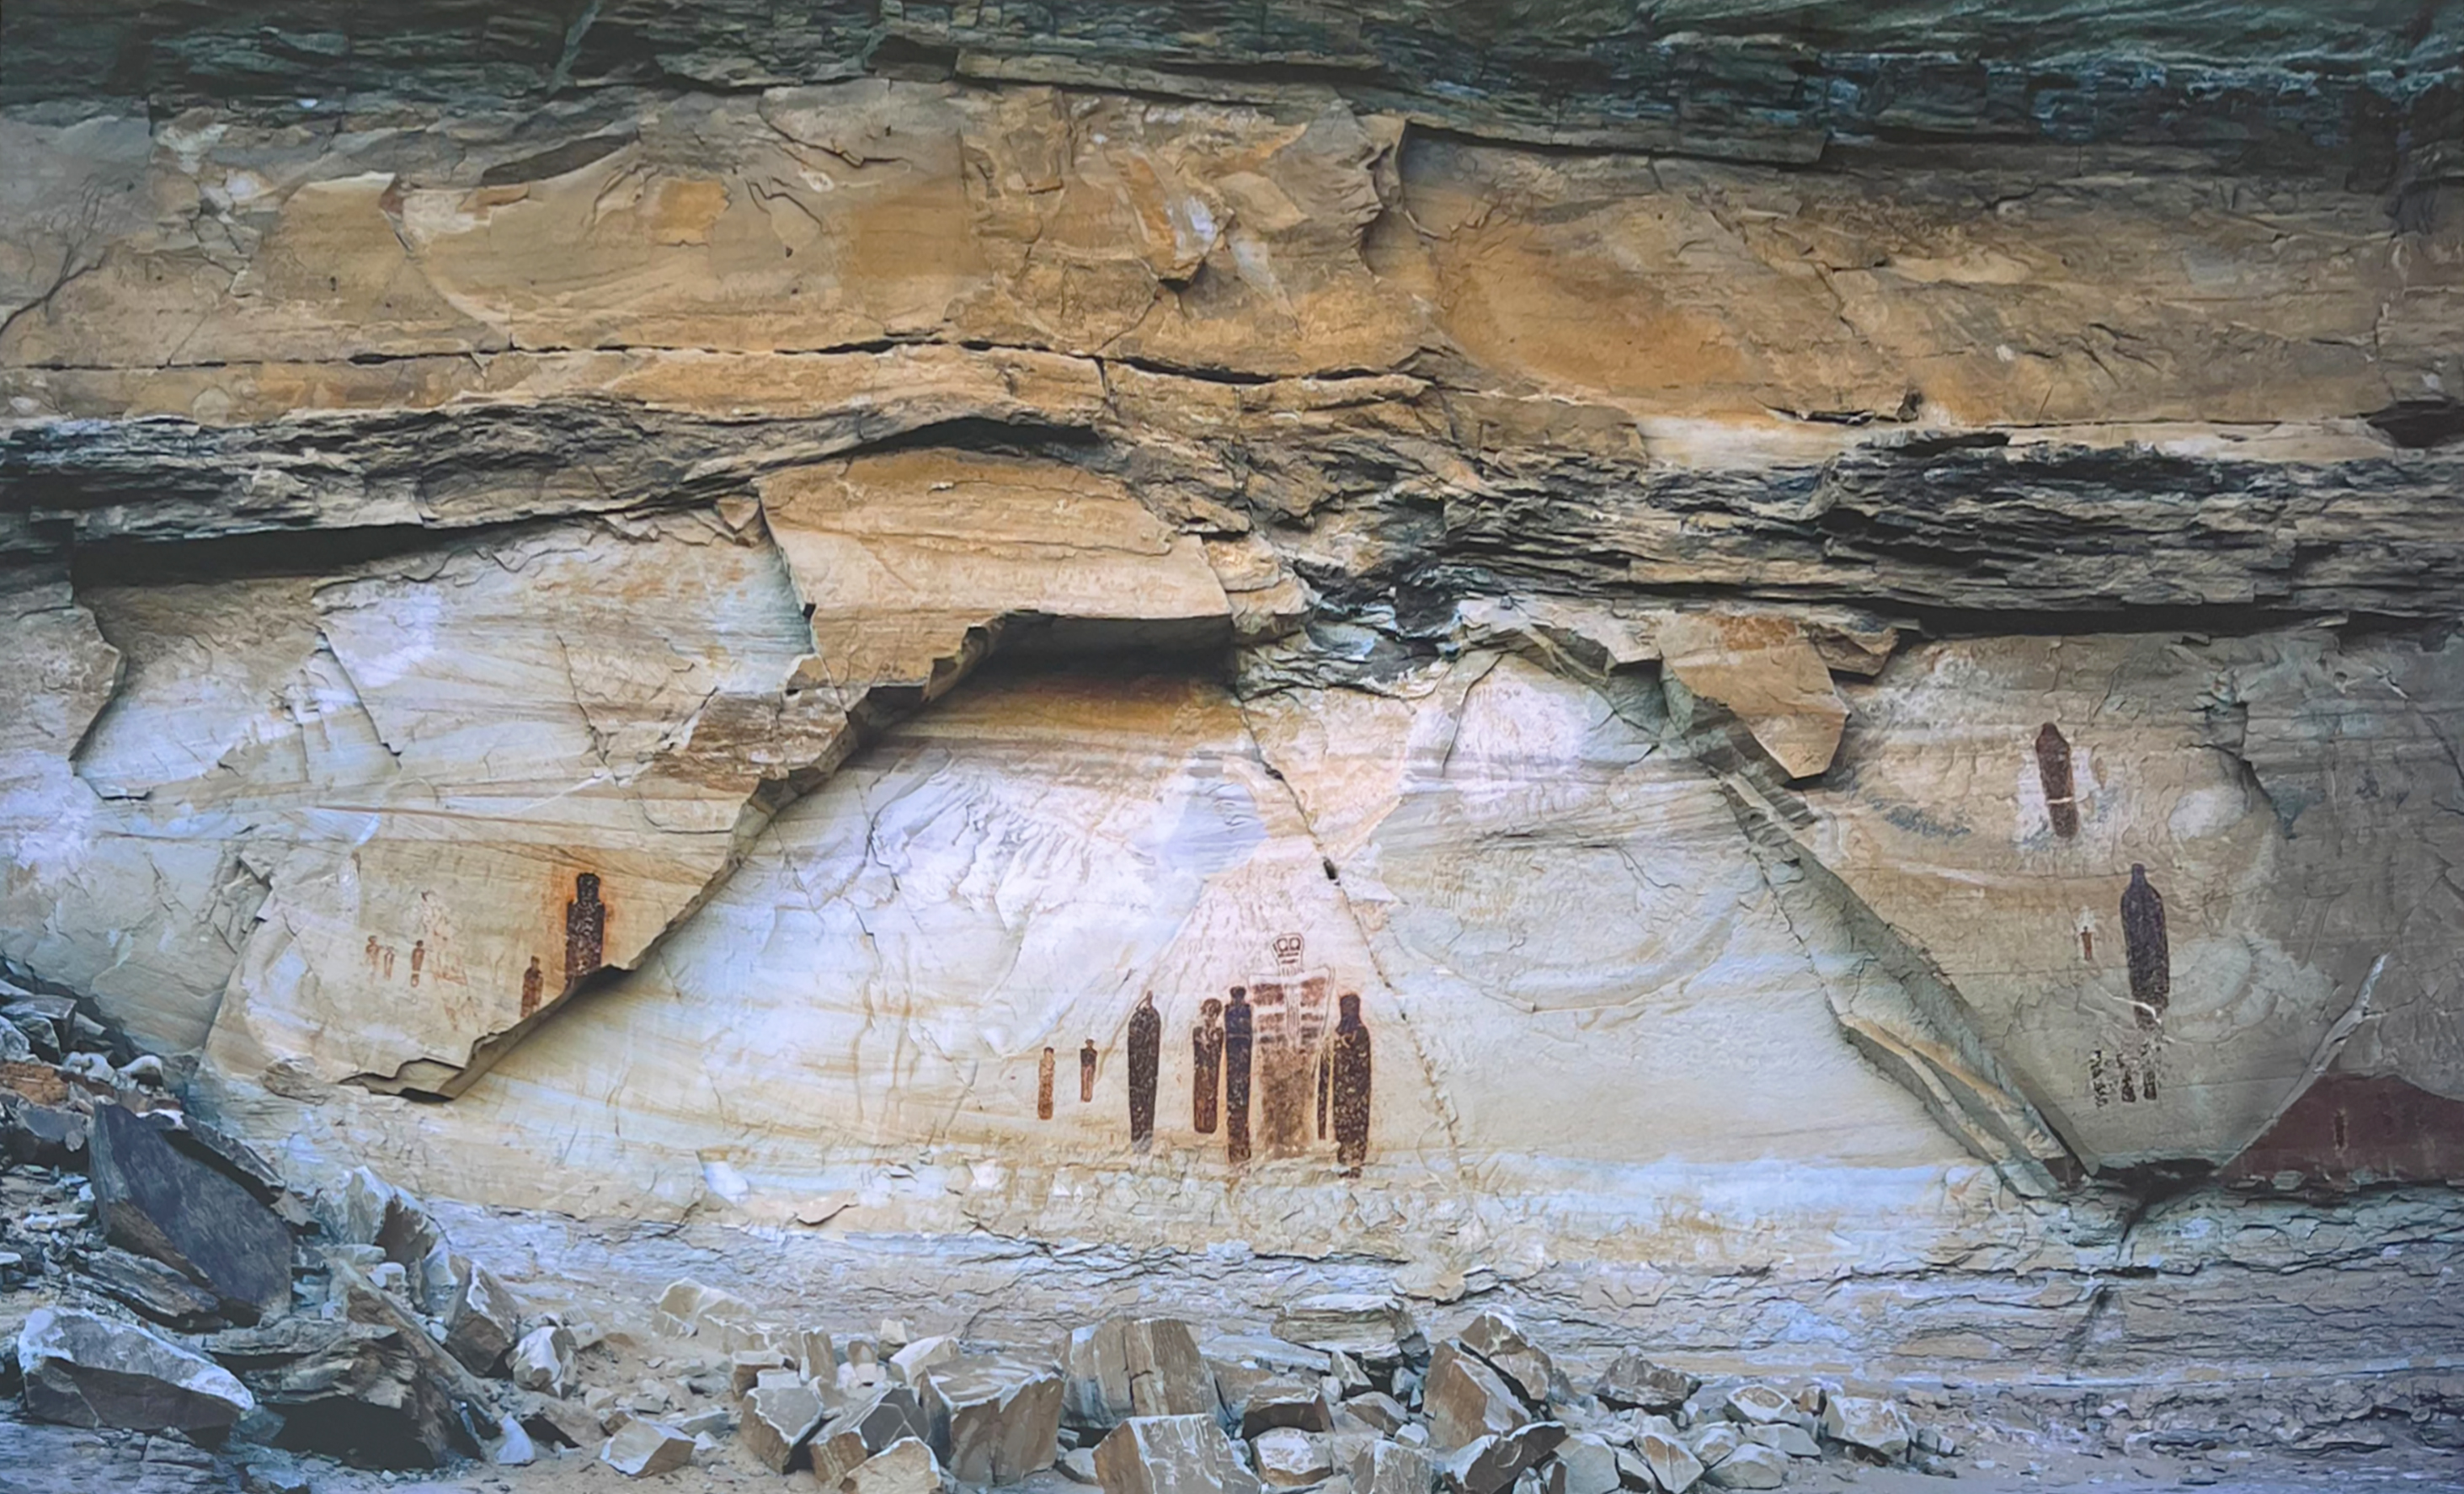 Holy Ghost Panel, The Great Gallery, Horseshoe Canyon, Canyonlands N.P.